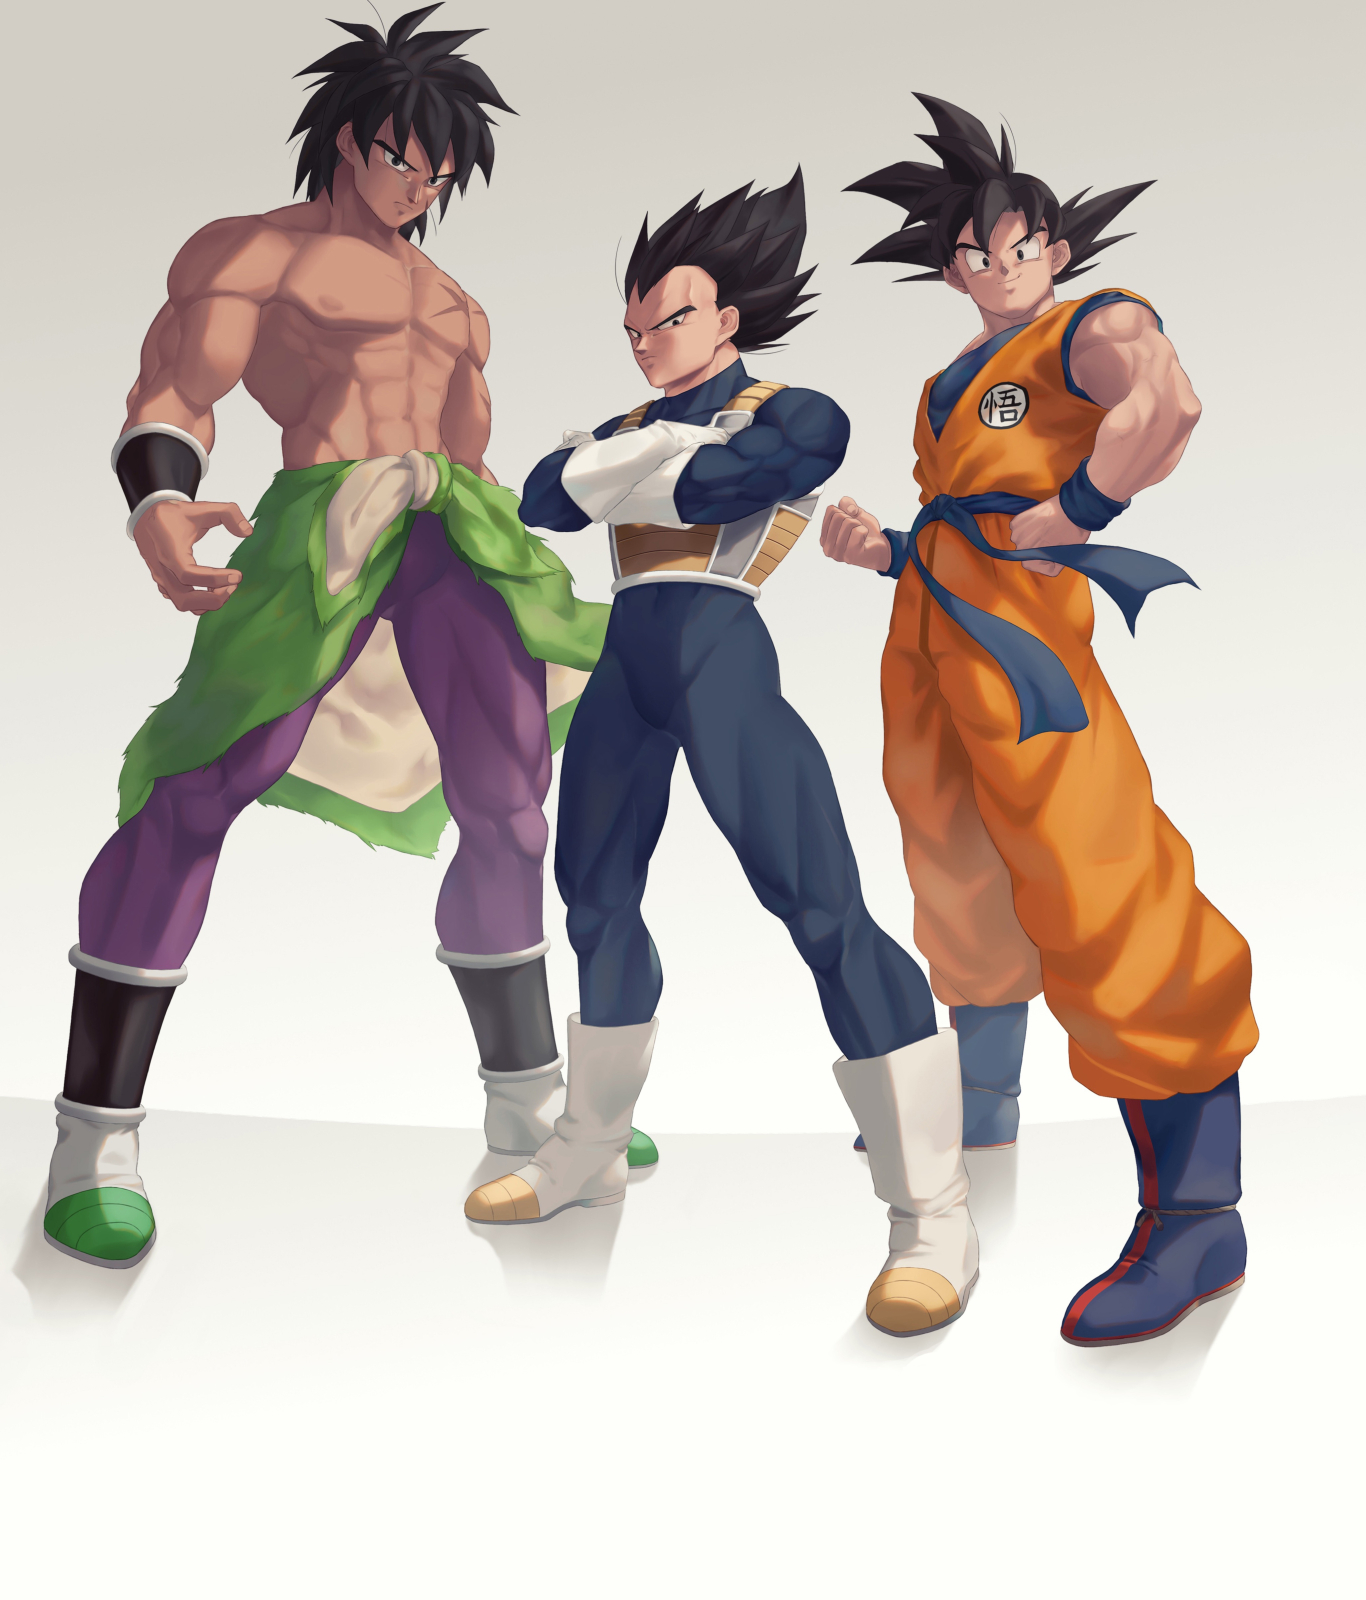 1366x1600 Broly Goku and Vegeta 1366x1600 Resolution Wallpaper, HD Anime 4K  Wallpapers, Images, Photos and Background - Wallpapers Den